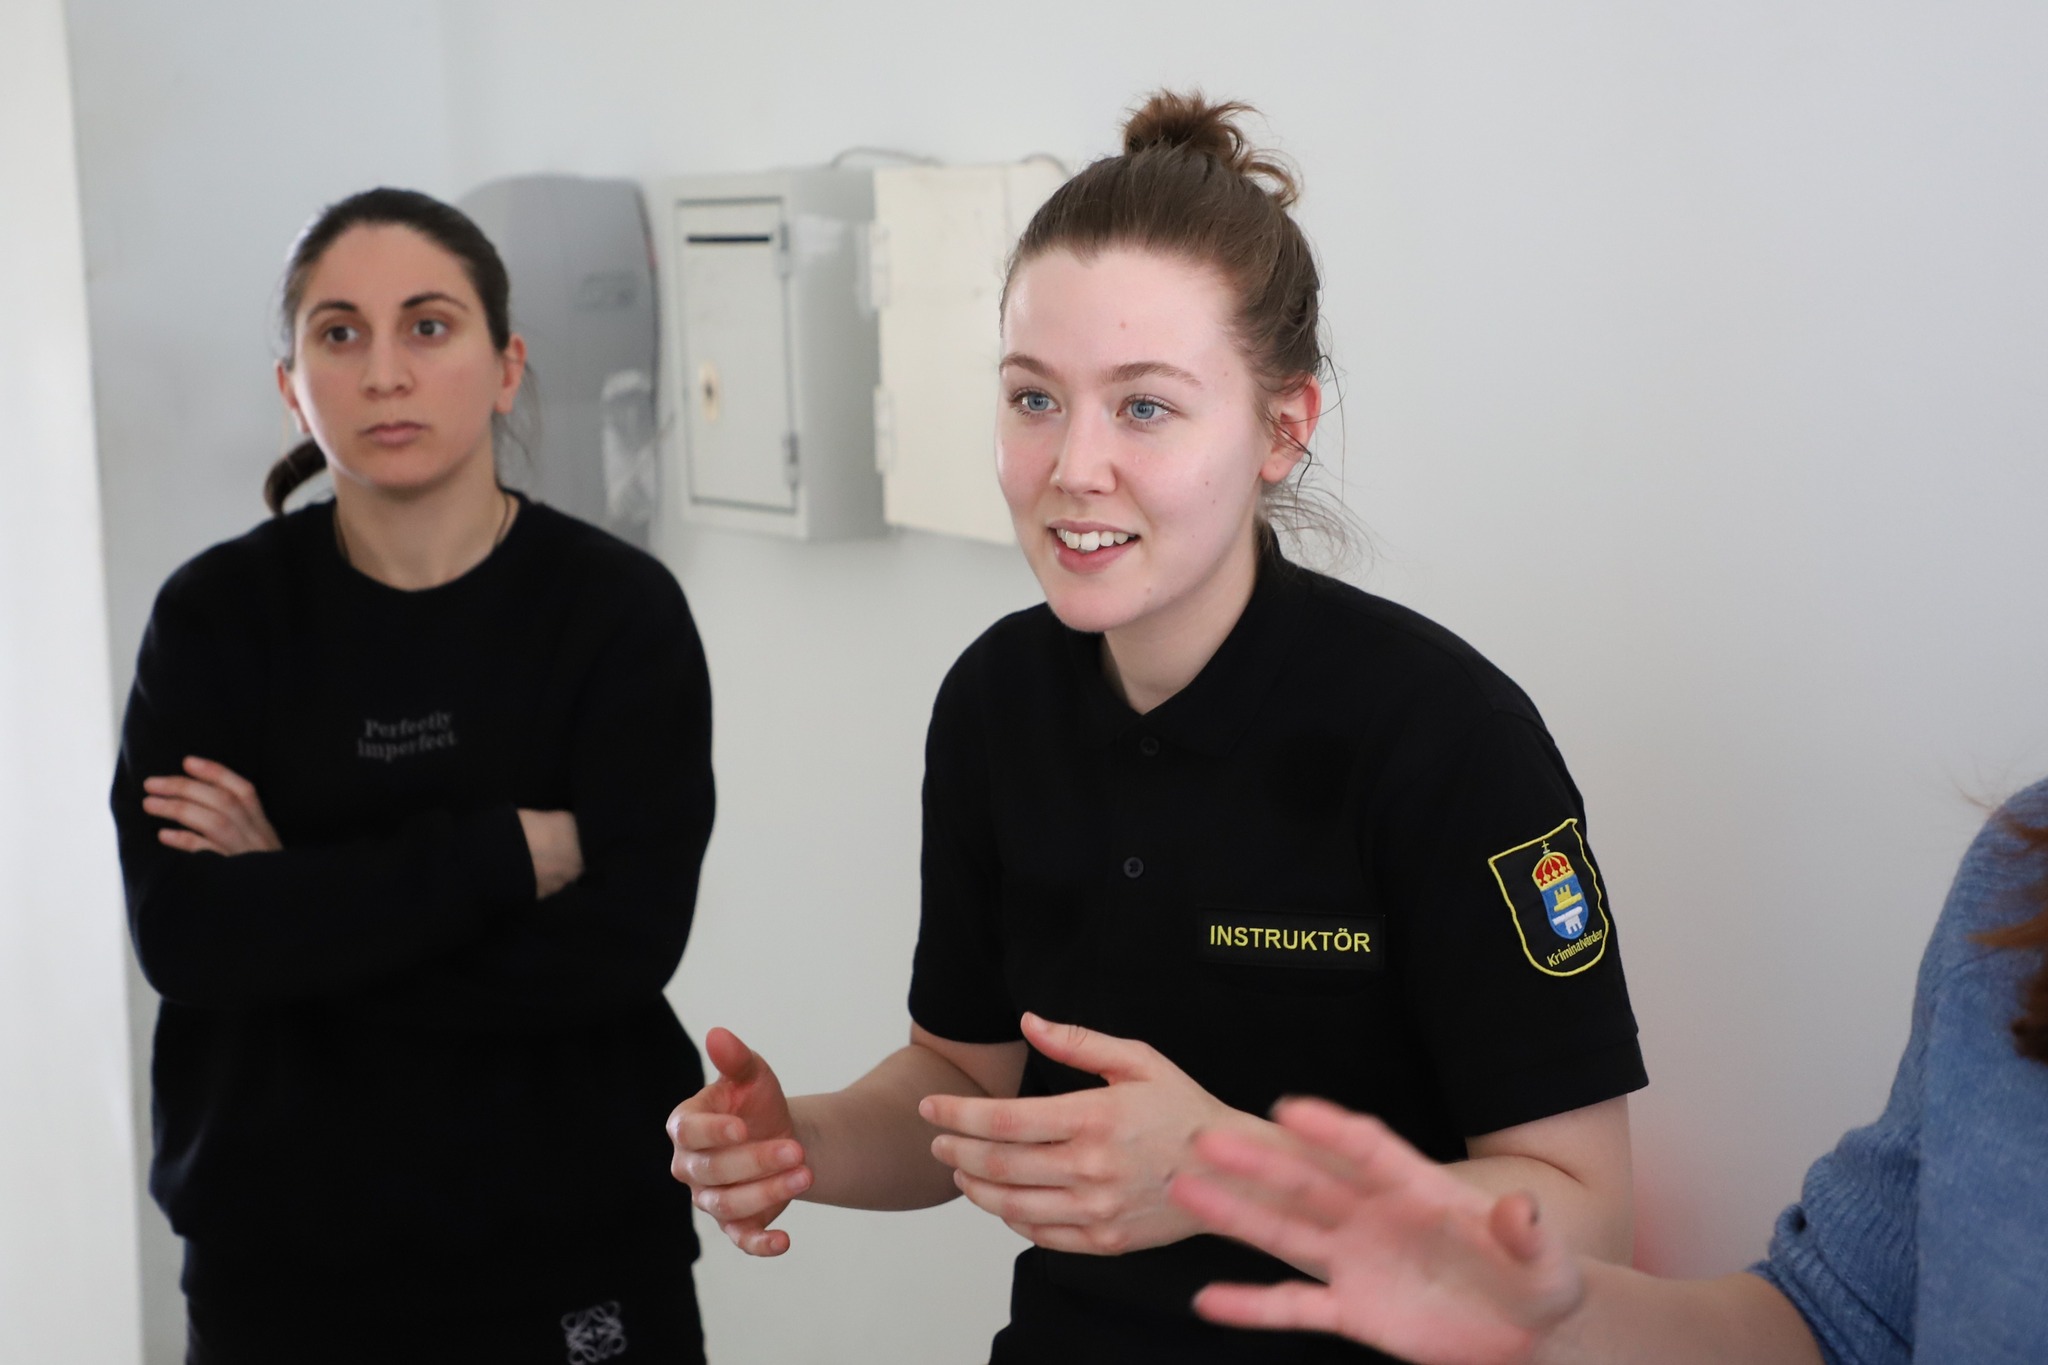 EULEX trains women correctional officers on dynamic security and self-defense